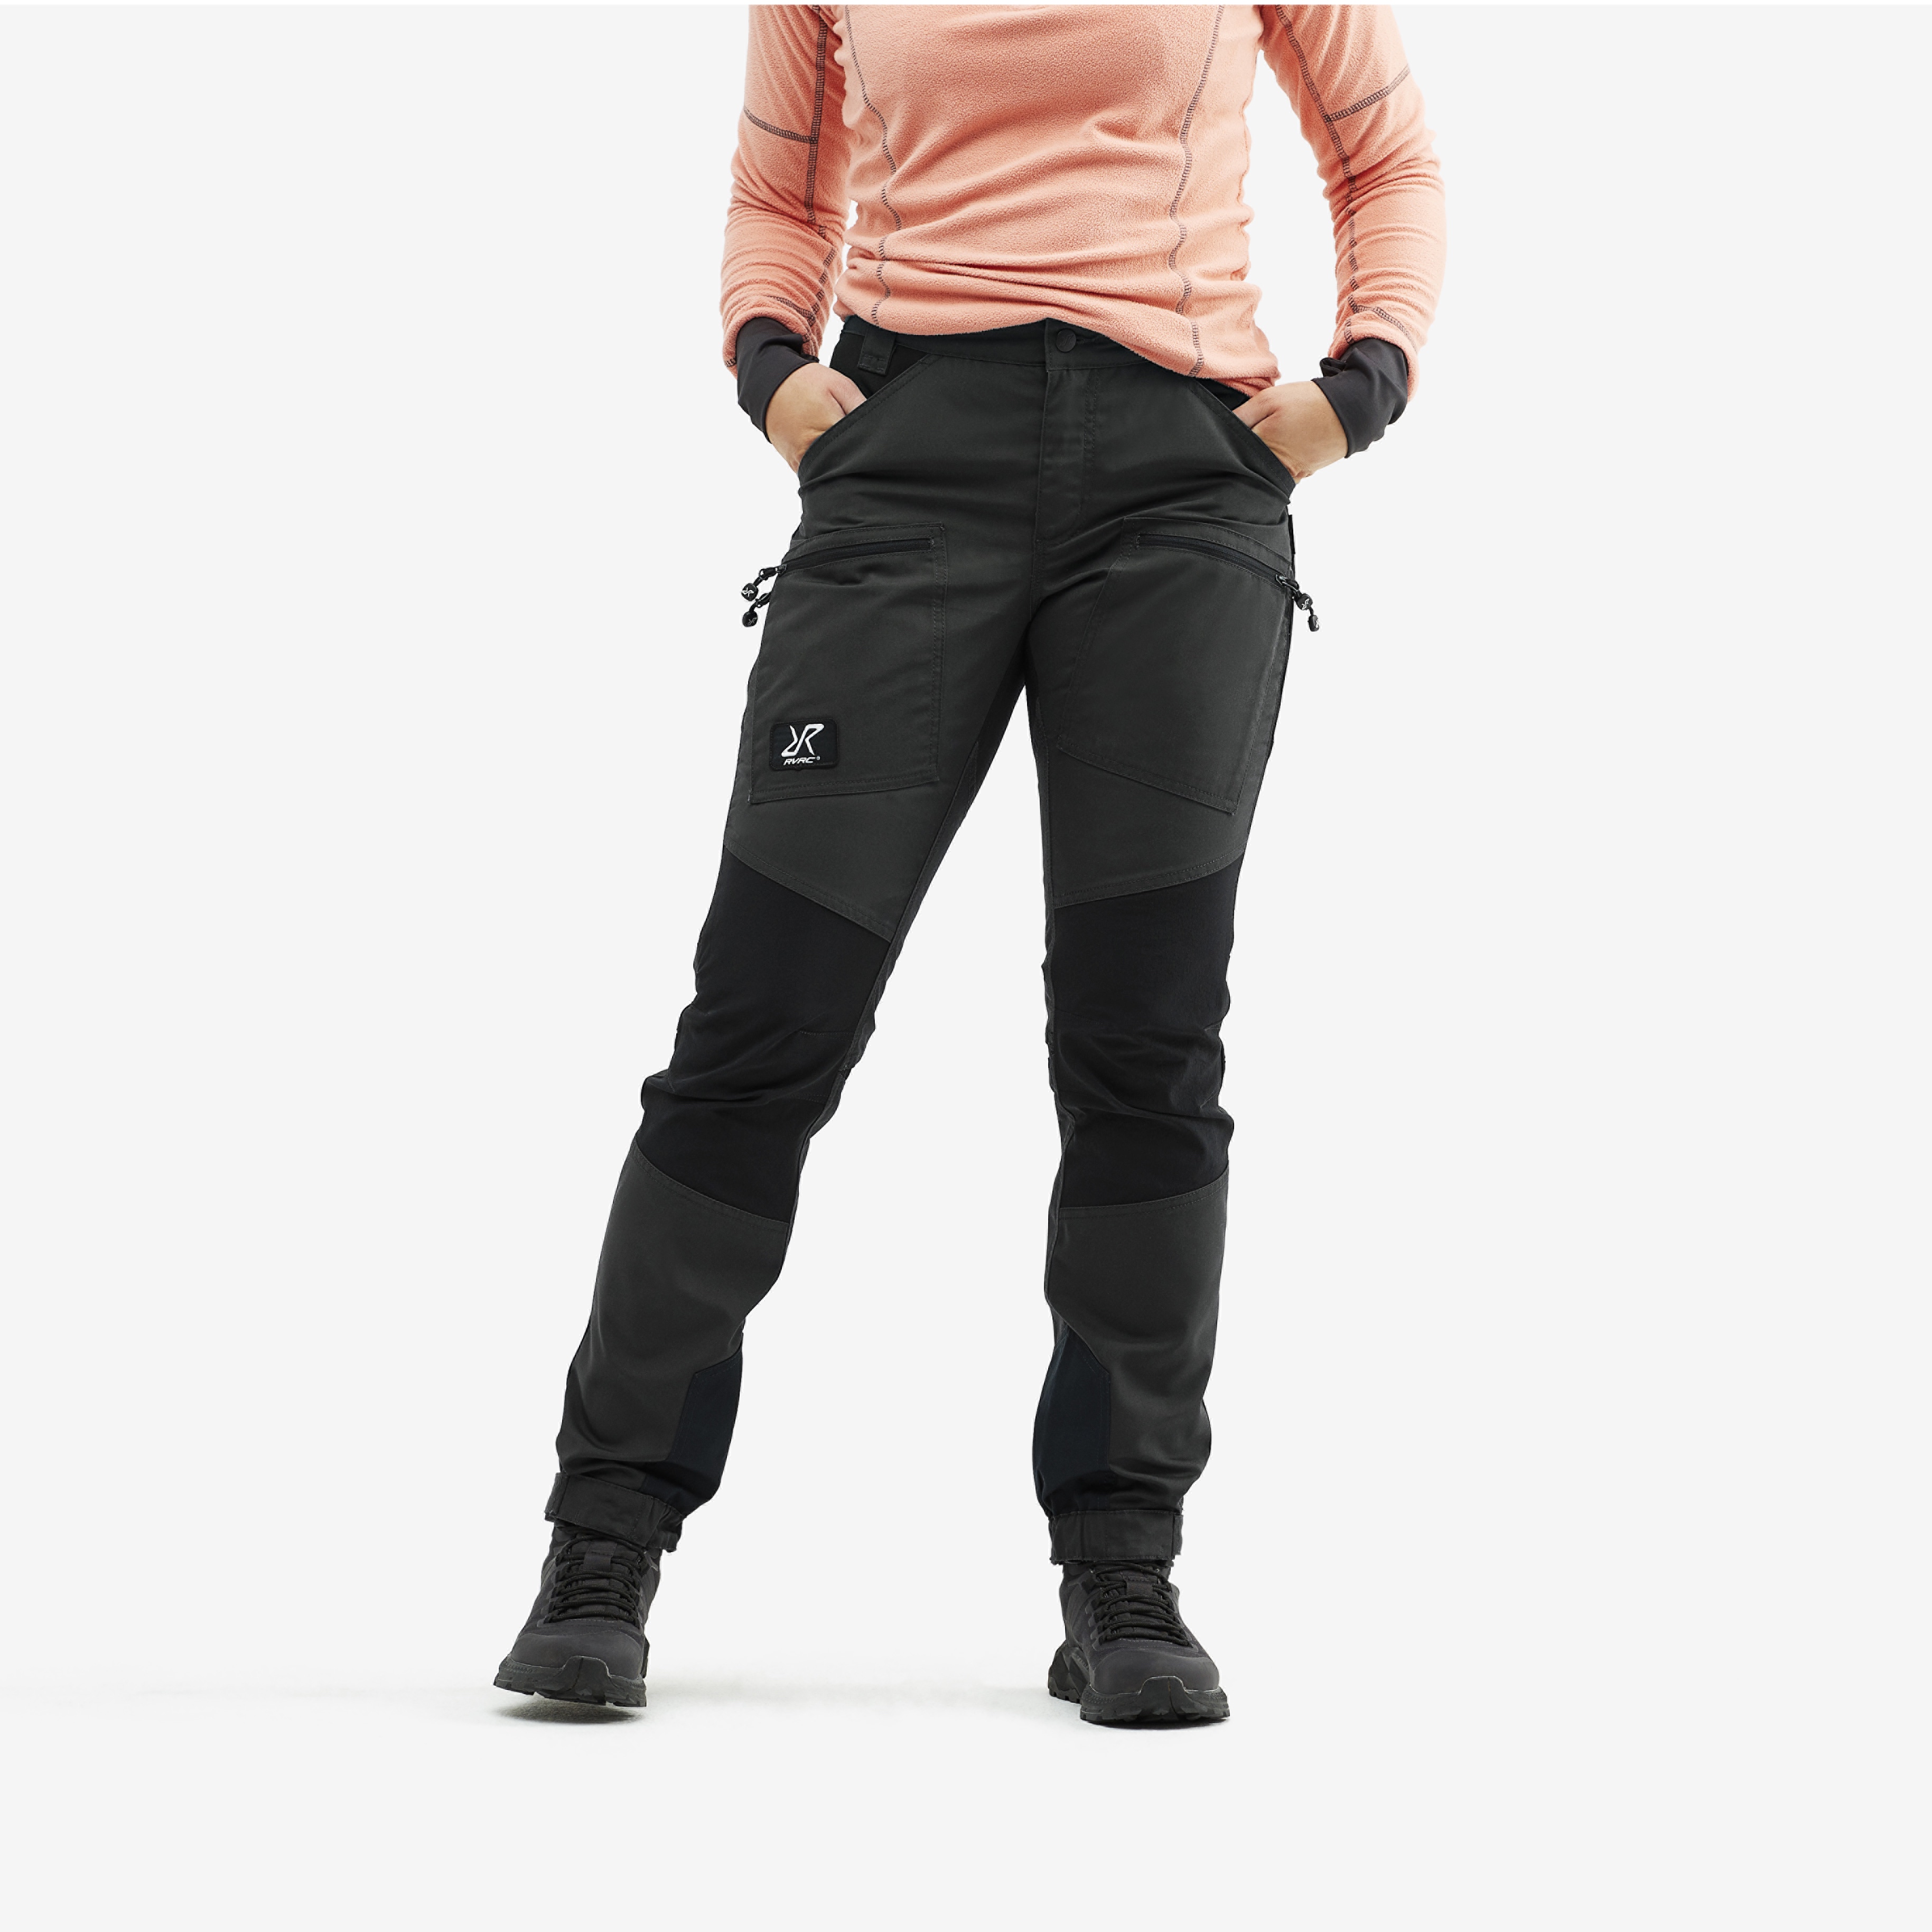 Nordwand Pro Short hiking pants for women in dark grey